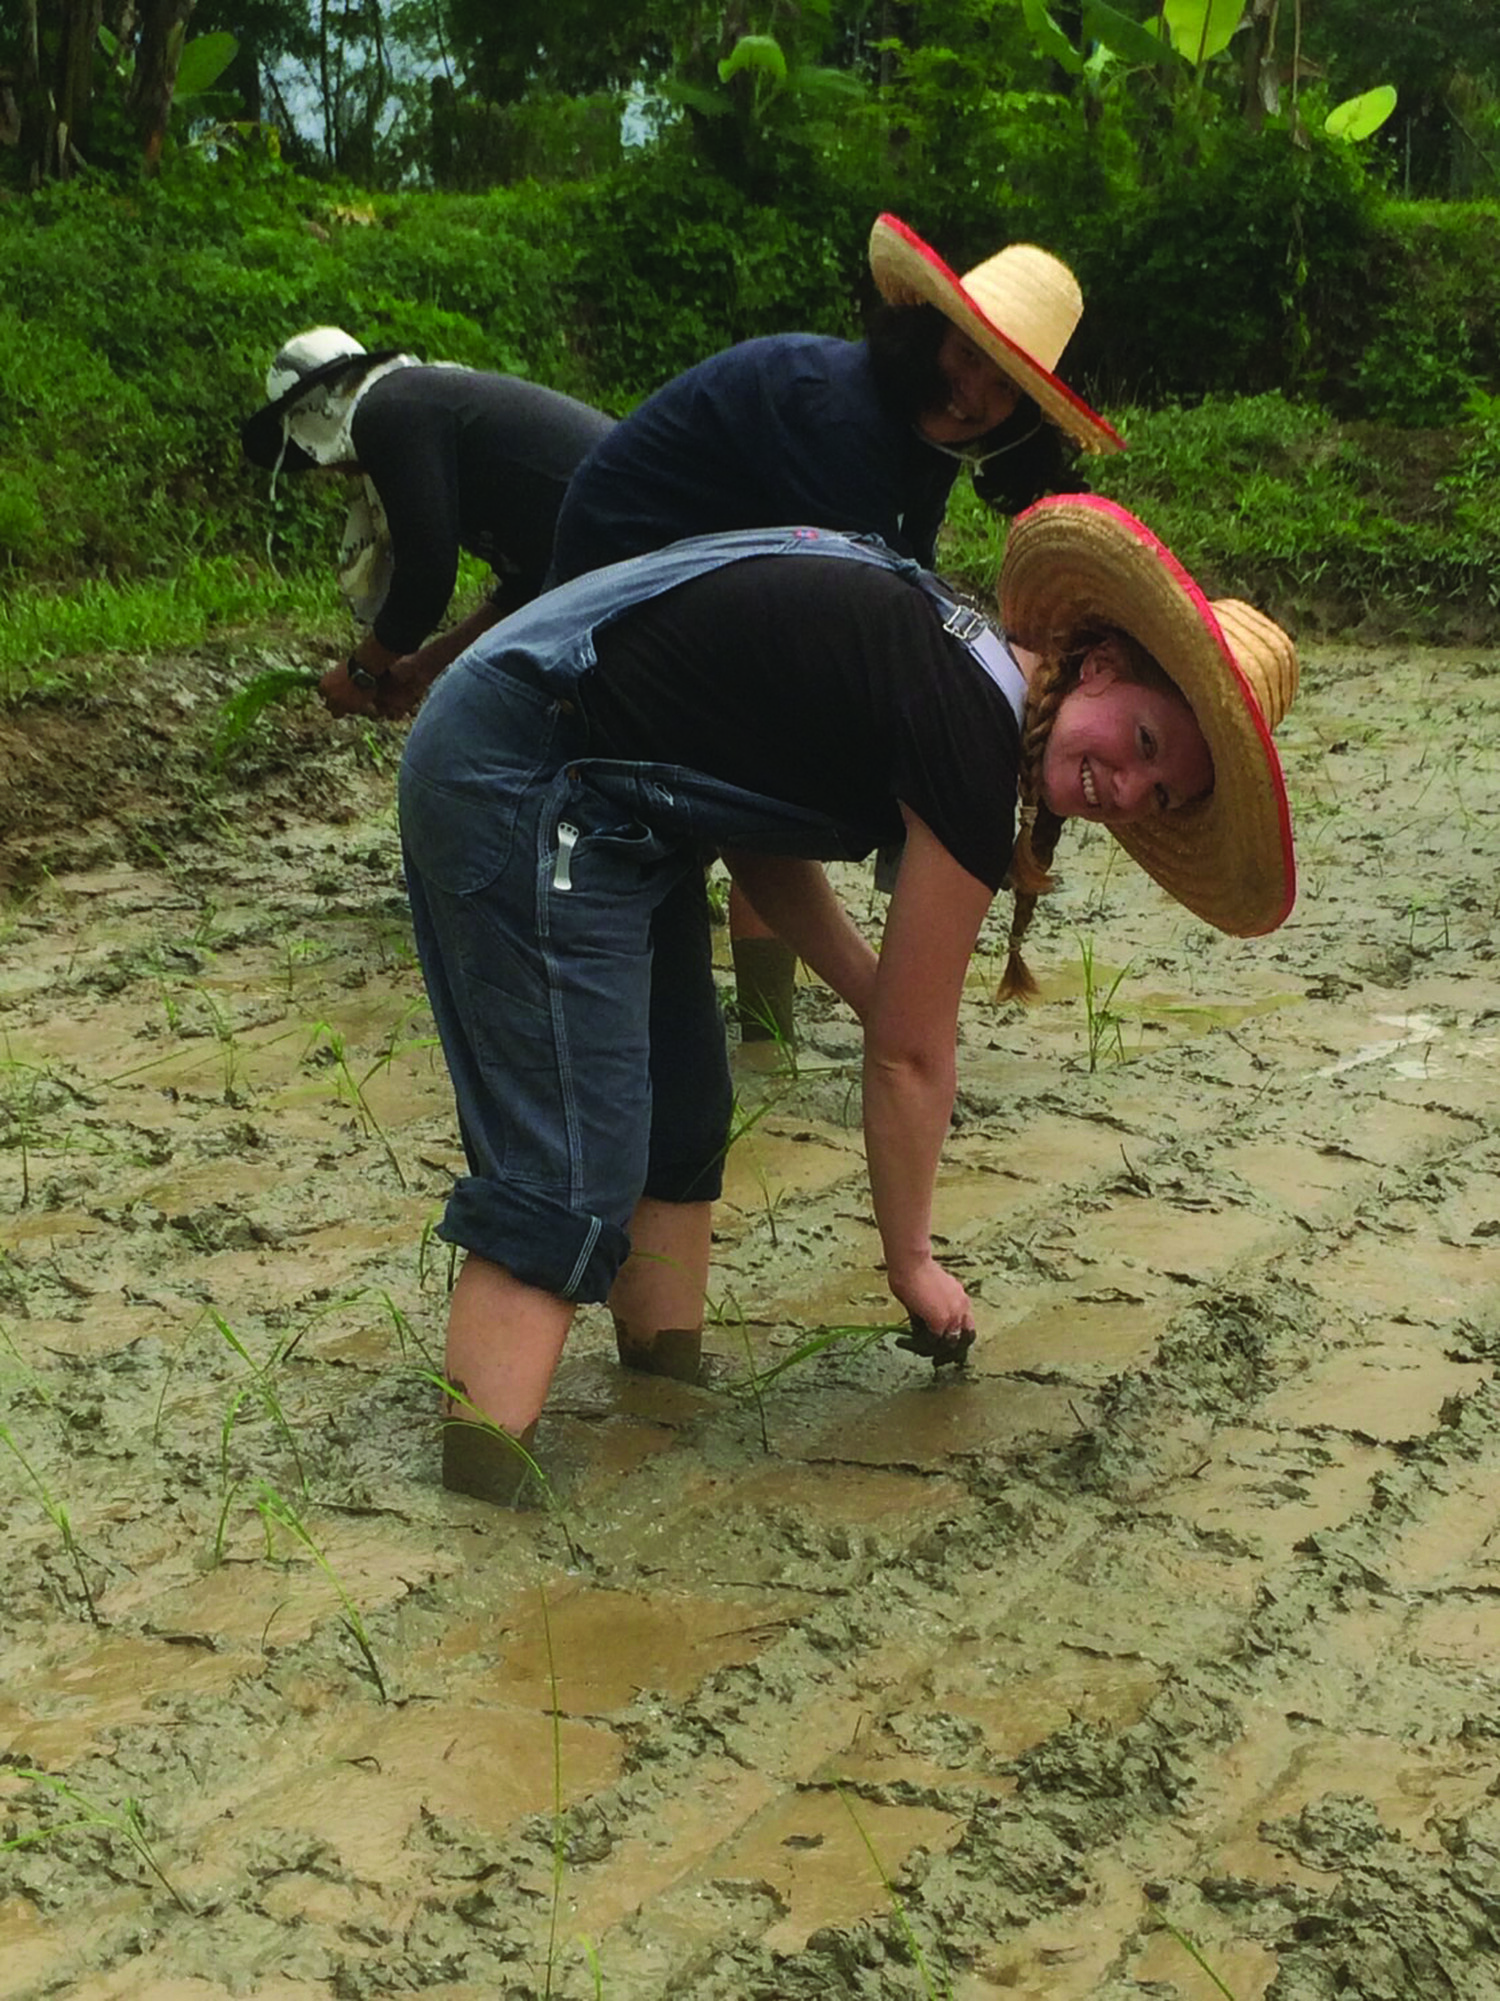 Chrissy’s experience with Thailand’s ecology was just as diverse as her experience with its people. Planting SRI rice at a training in Thailand was a highlight.